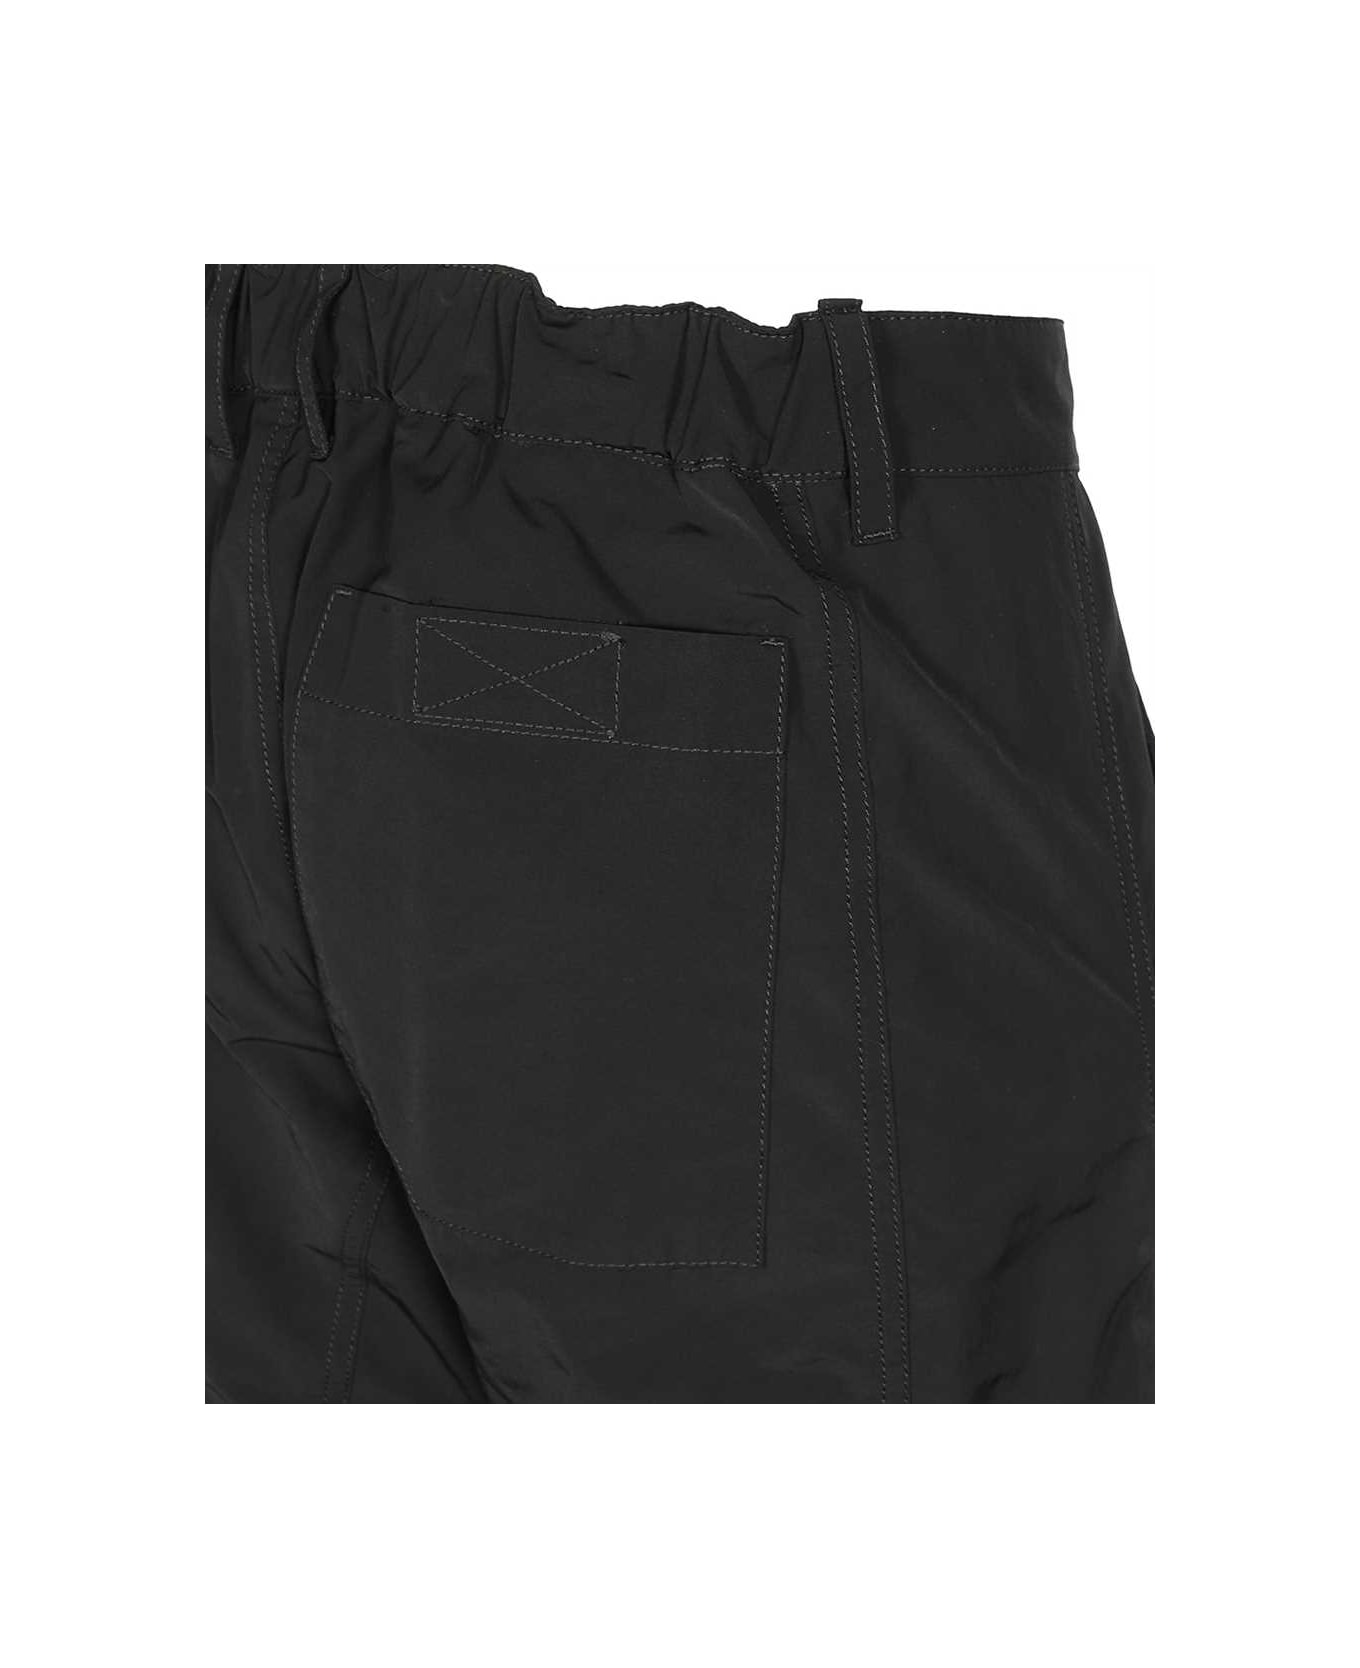 44 Label Group Cargo Trousers - black